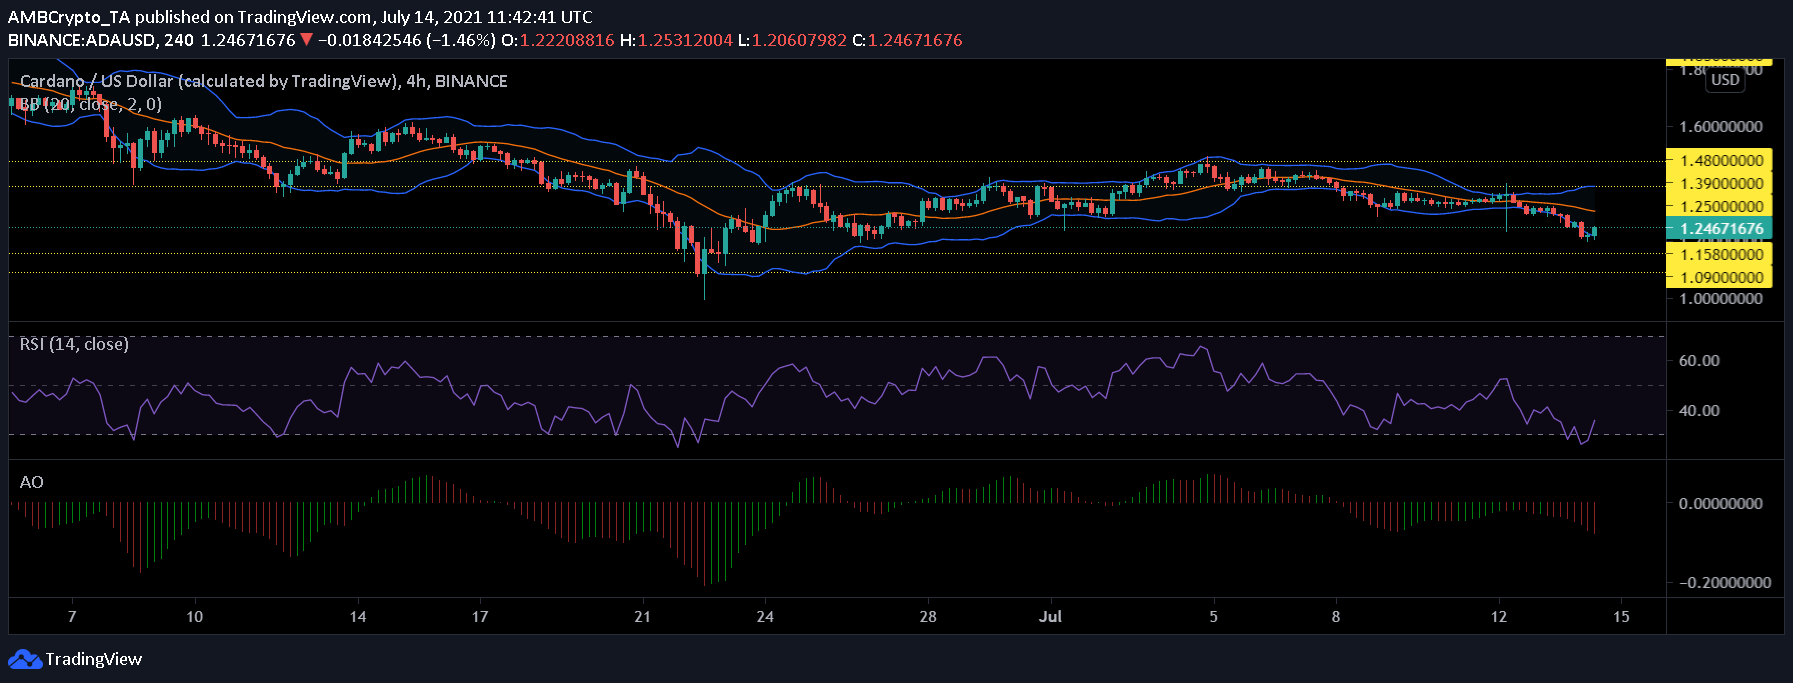 Cardano, TRON and AAVE Price Analysis: July 14